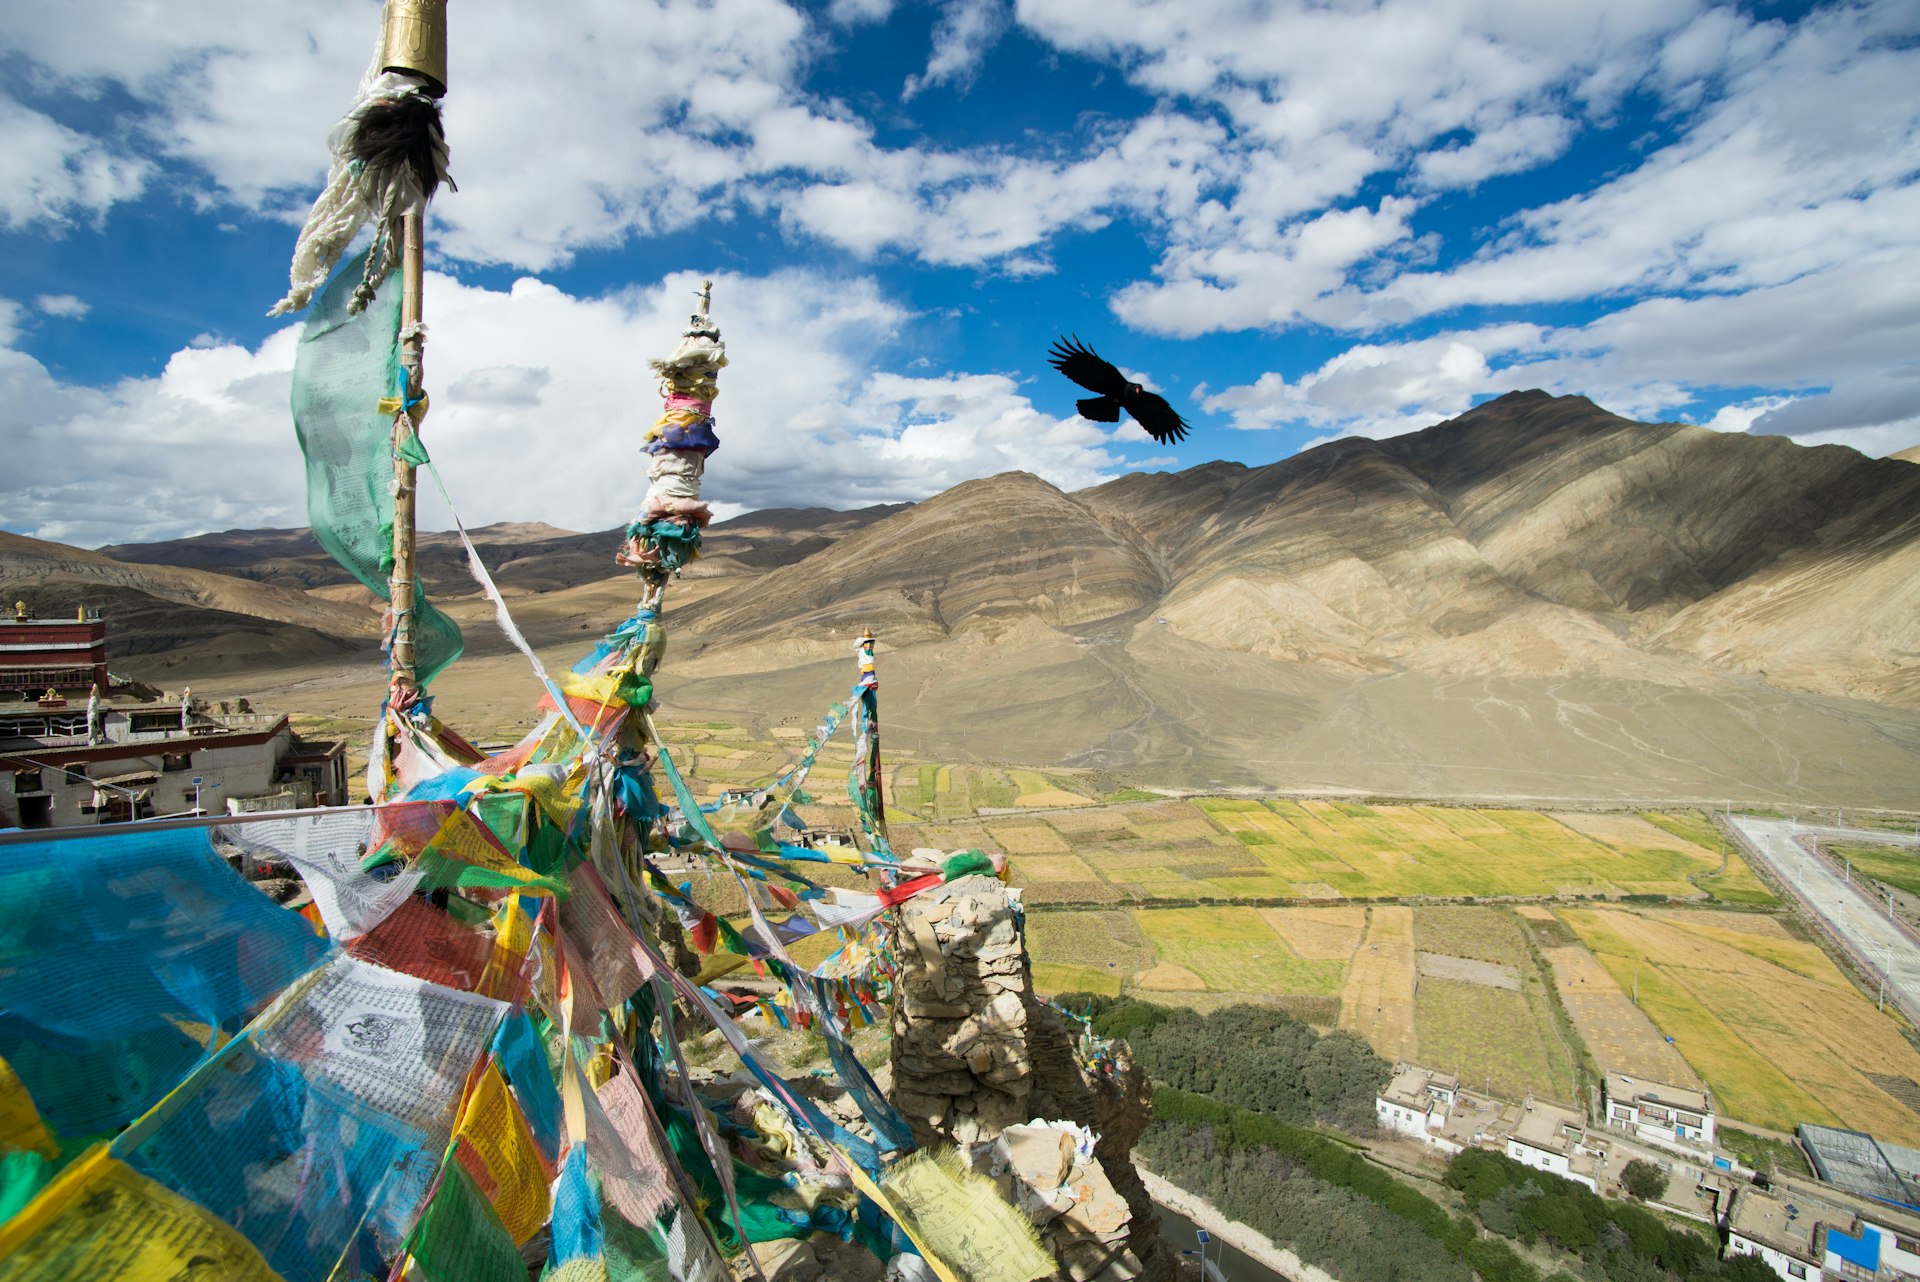 A view from above the monastery. Tibetan prayer flags adorn the top while a bird flies next to them. Mountains are in the background.